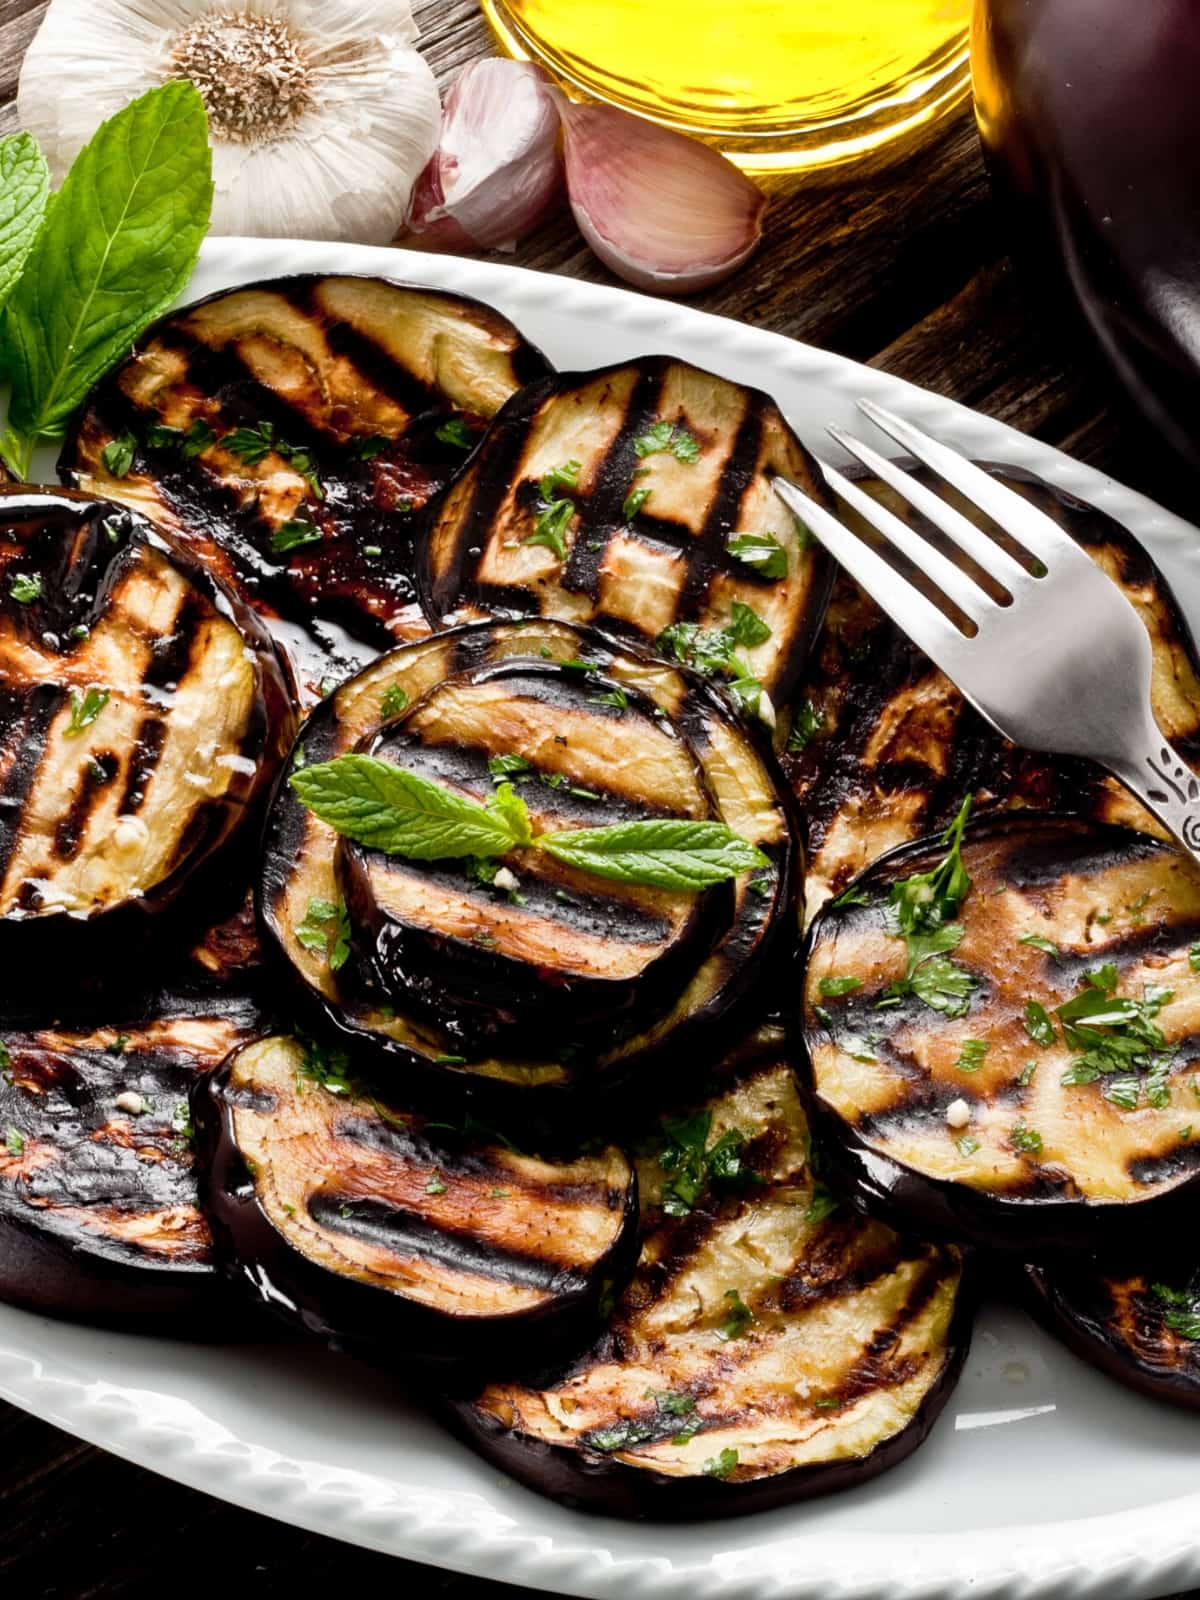 A plate of food on a table, with Grilled eggplant